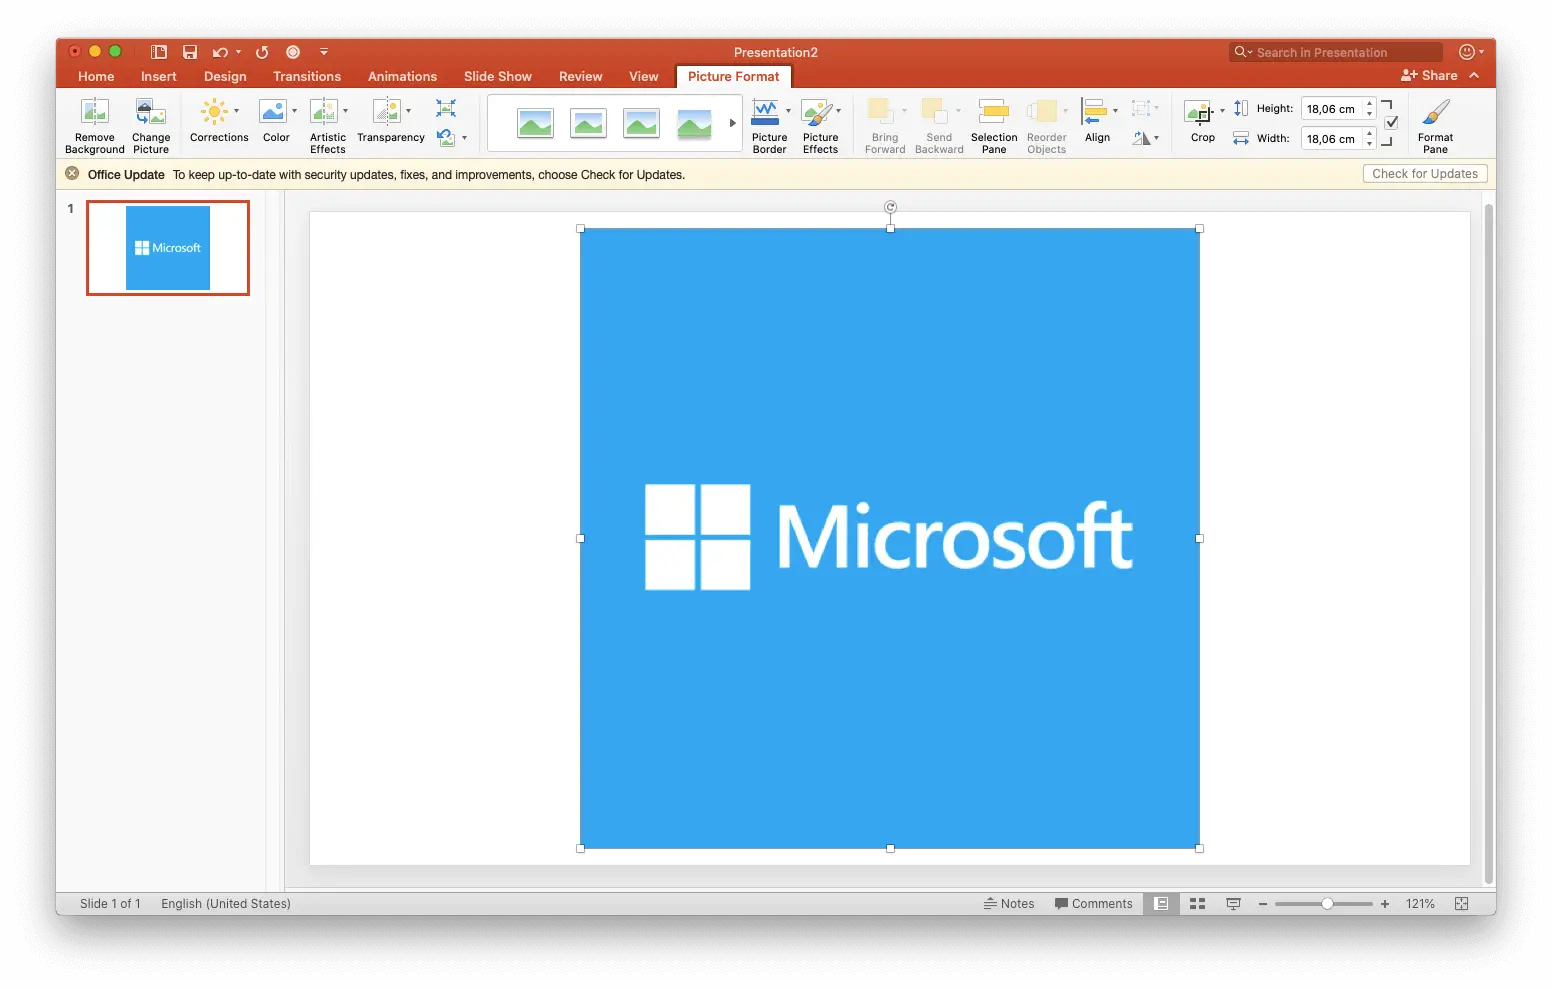 How to Make An Image Transparent in Powerpoint